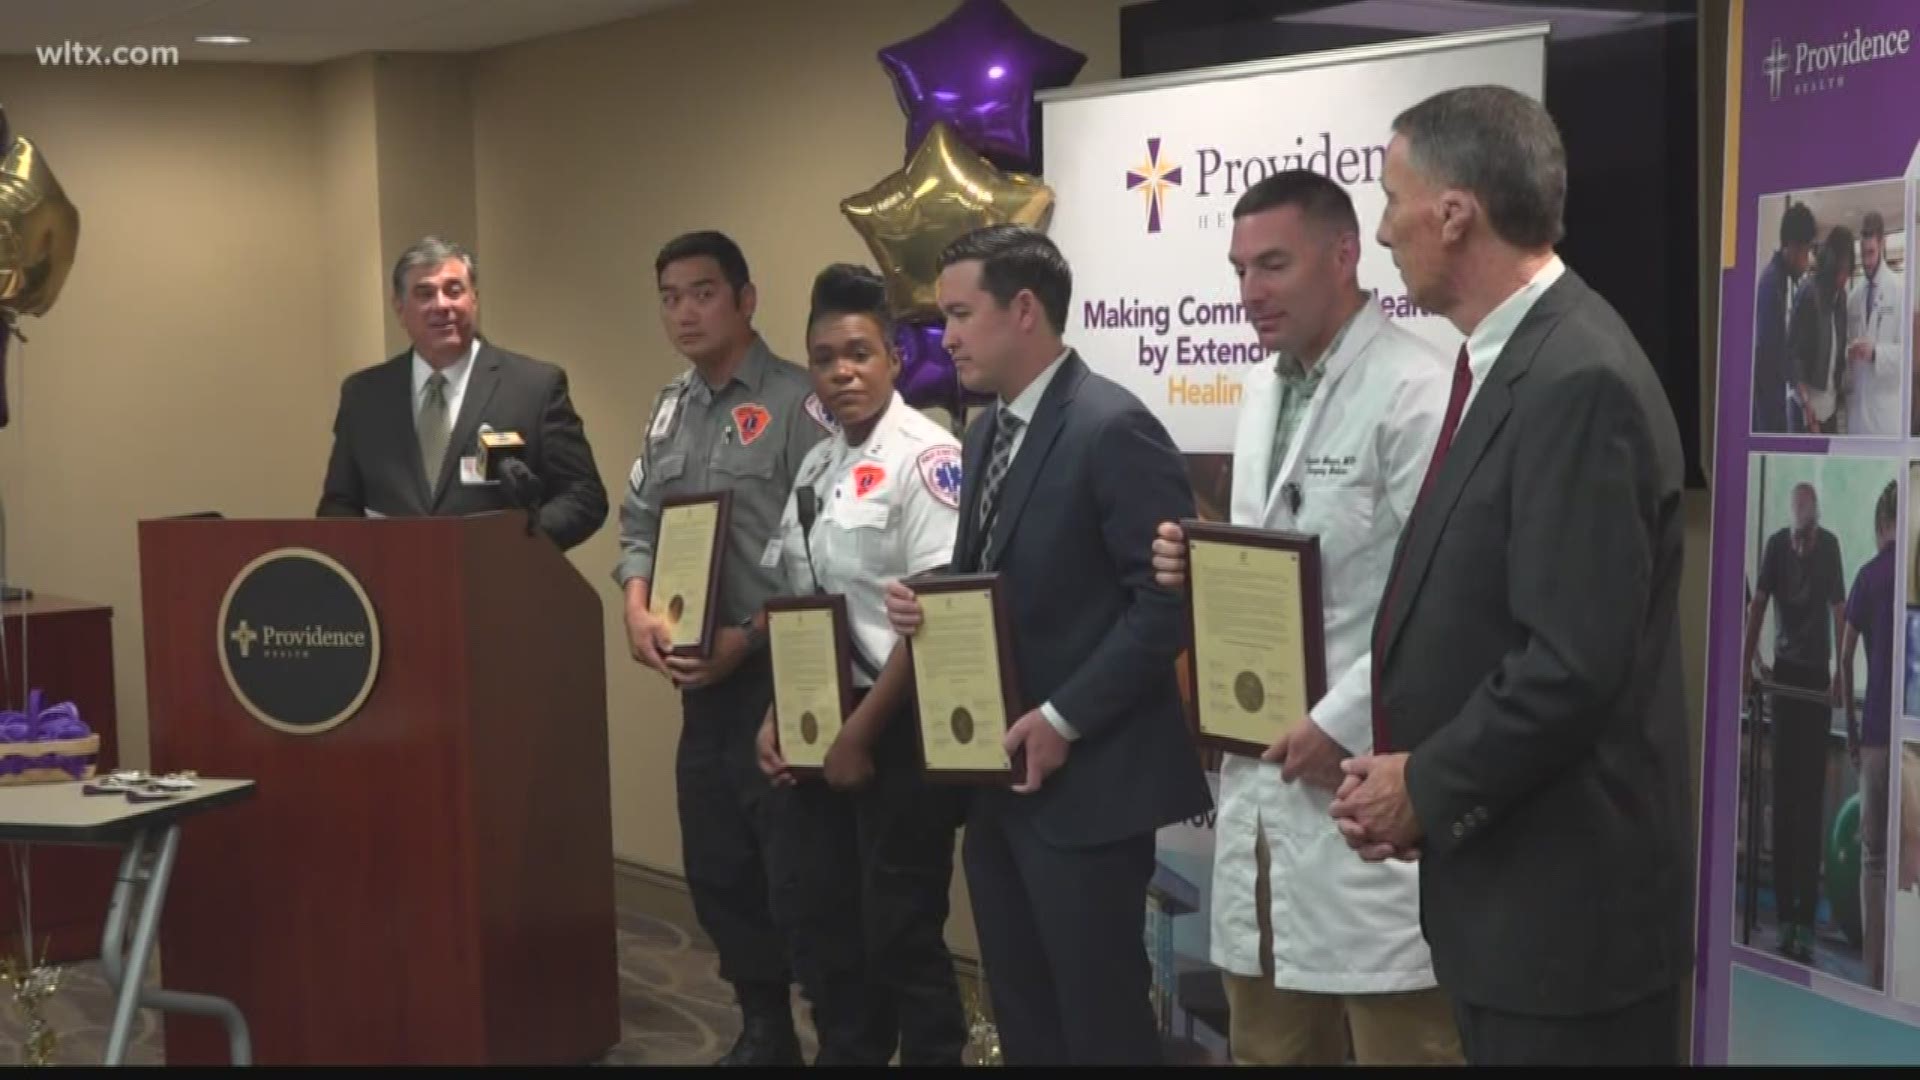 Emergency technicians honored at Providence Health.